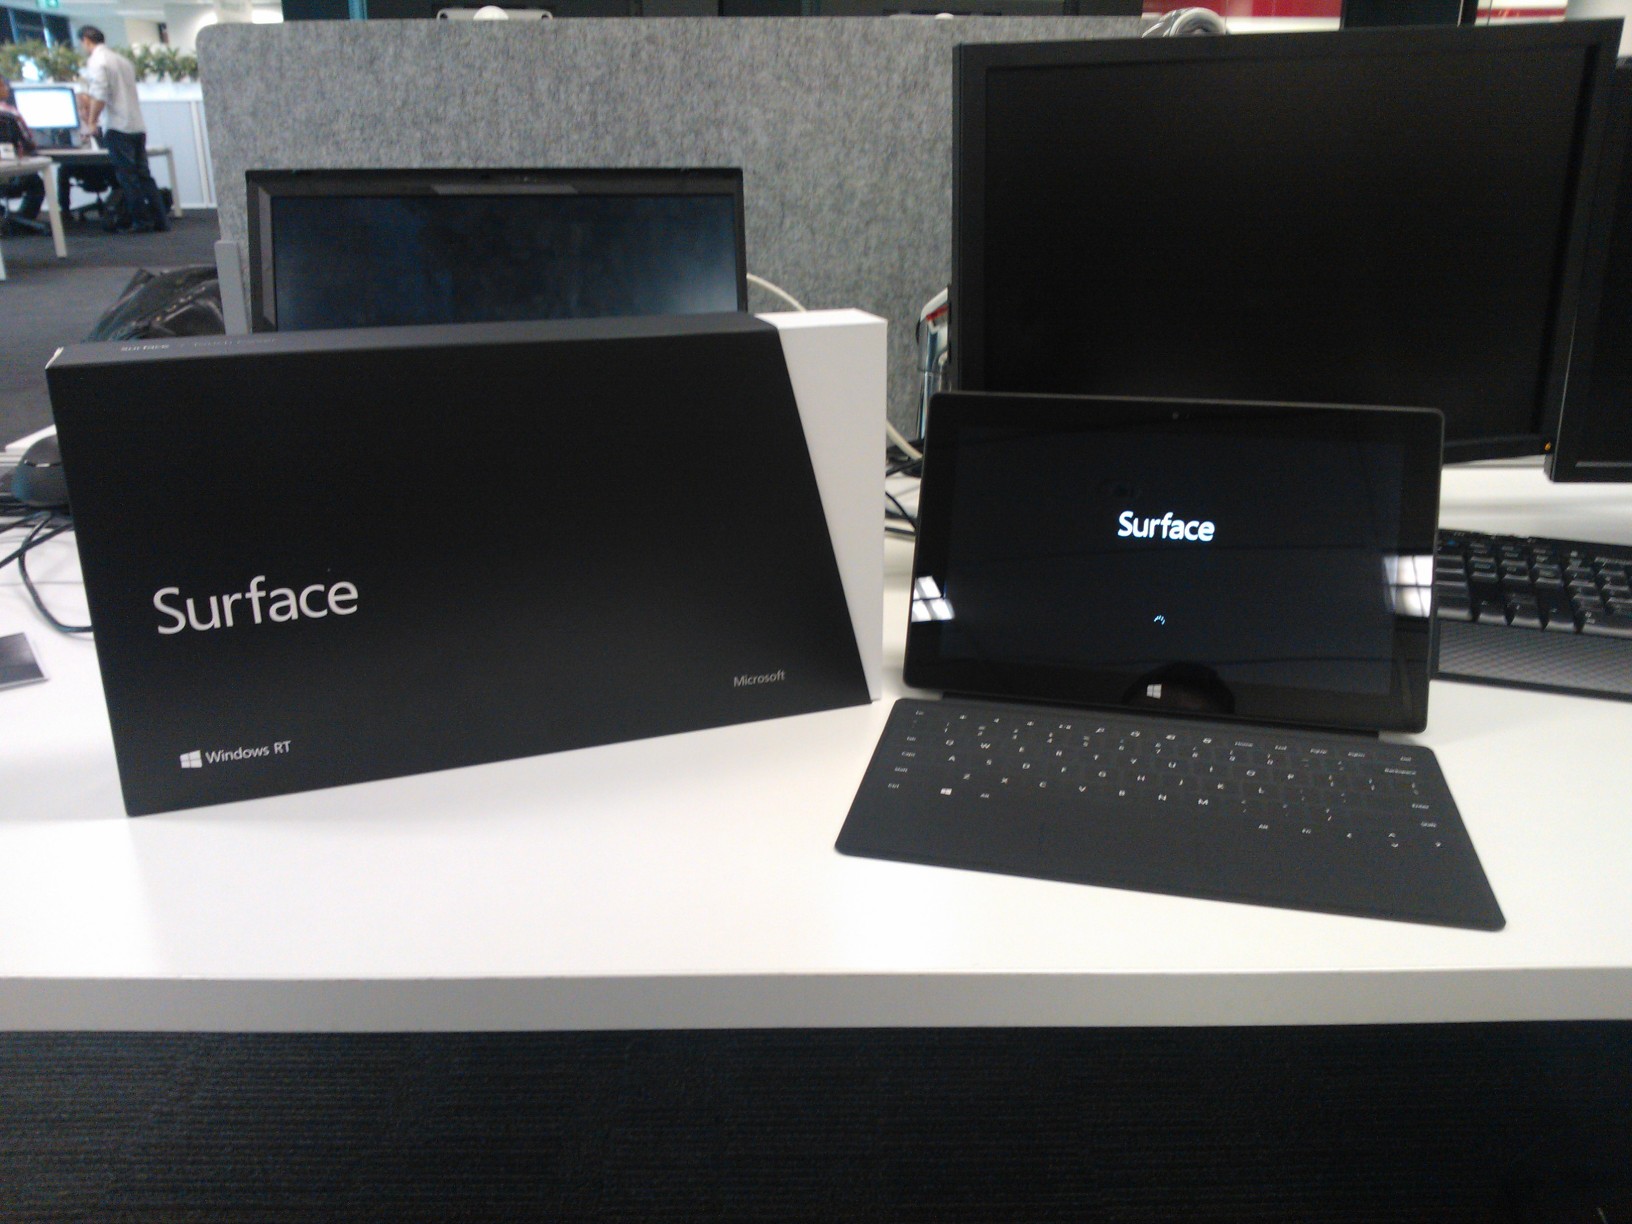 Description Microsoft Surface Tablet Puter And Its Box Jpg